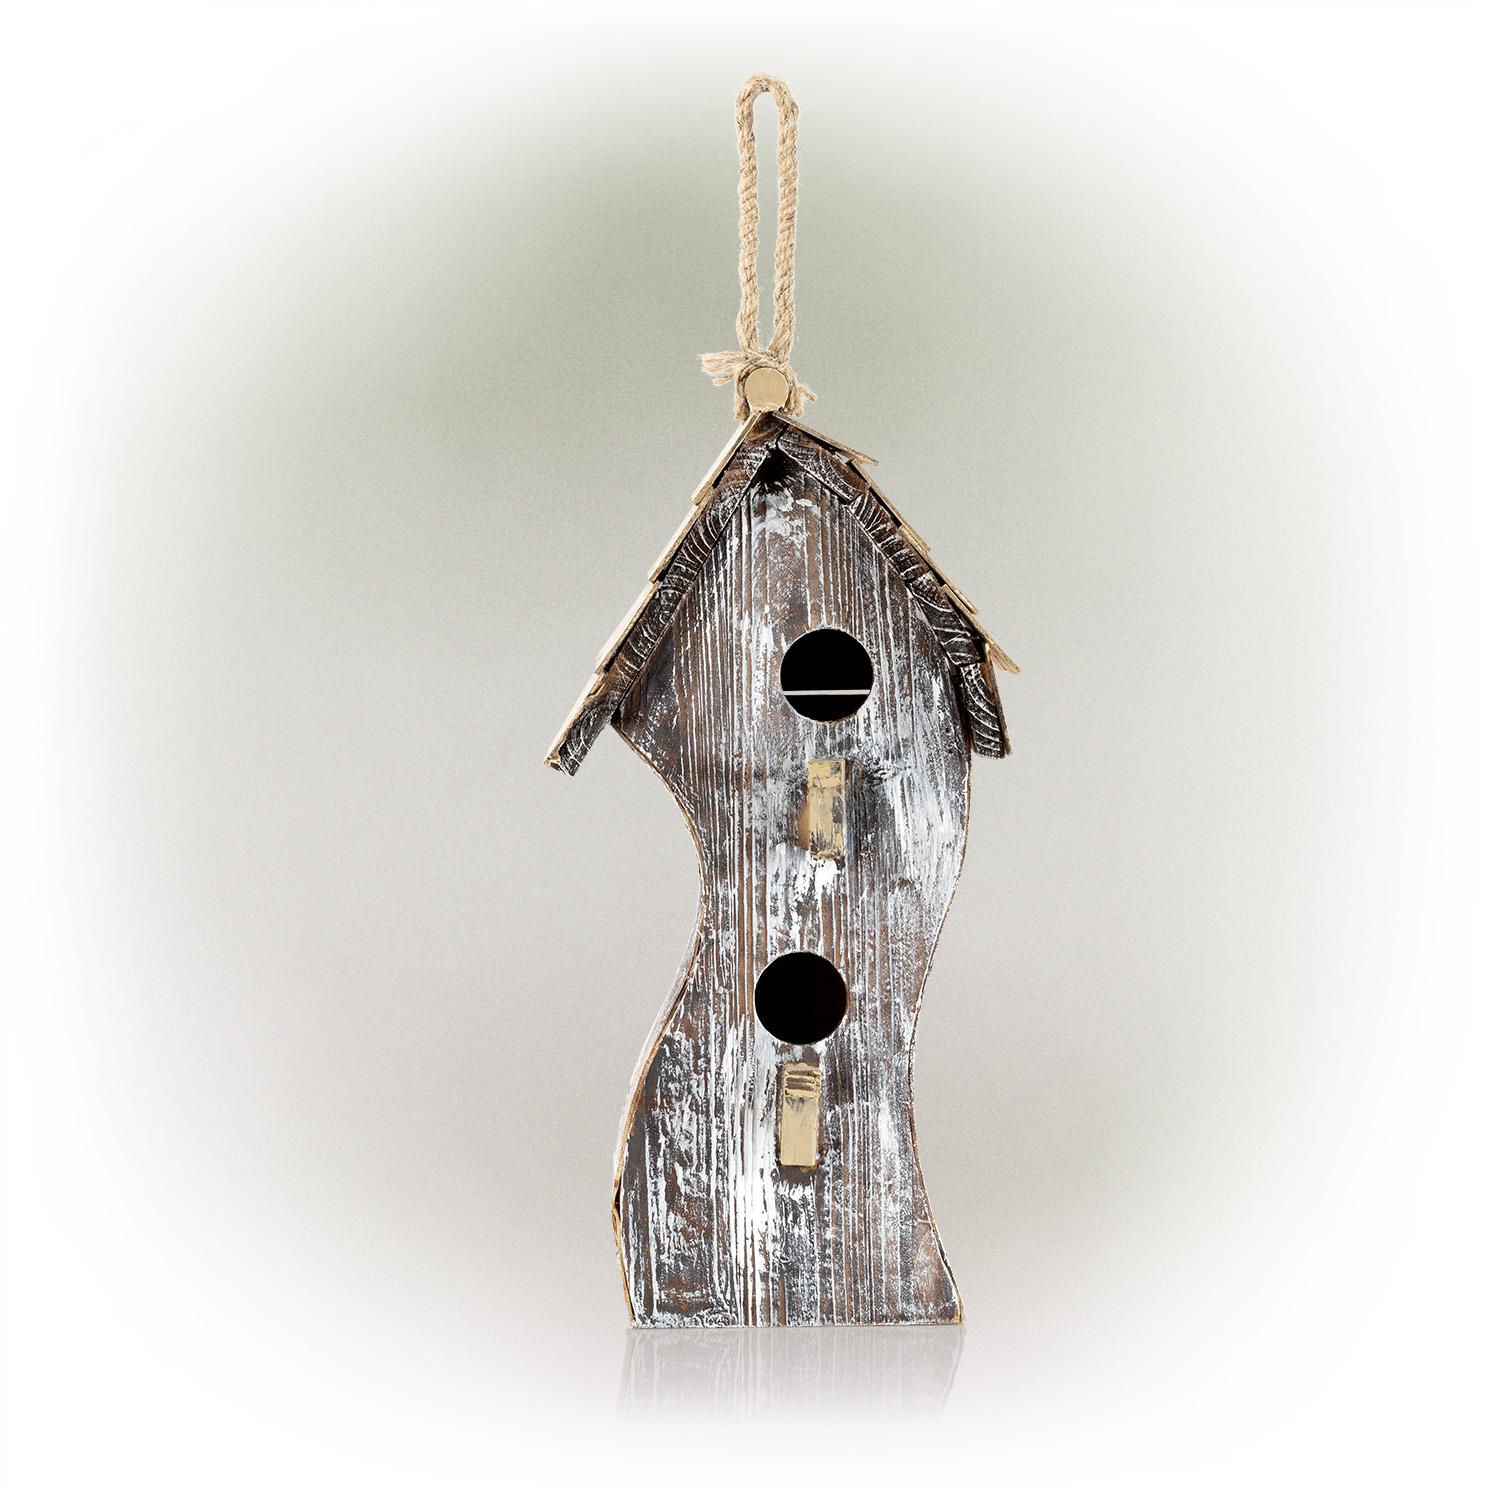 Ophelia & Co. Eby Animals Decorative Bird House Or Cage & Reviews